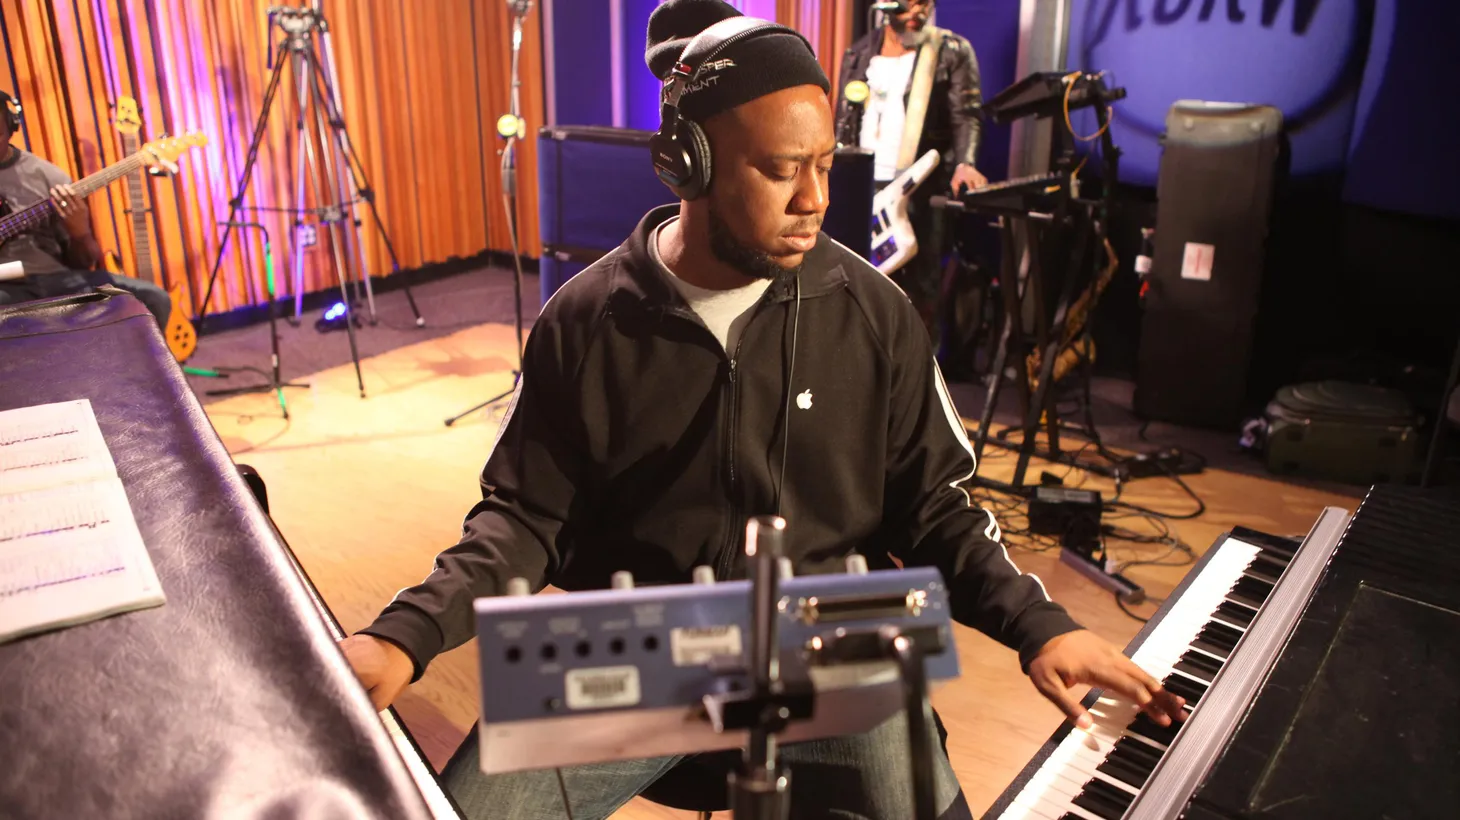 The Robert Glasper Experiment picked up a Grammy Award for Best R&B album in 2013 and visited our studios late that year to play songs from Black Radio 2.